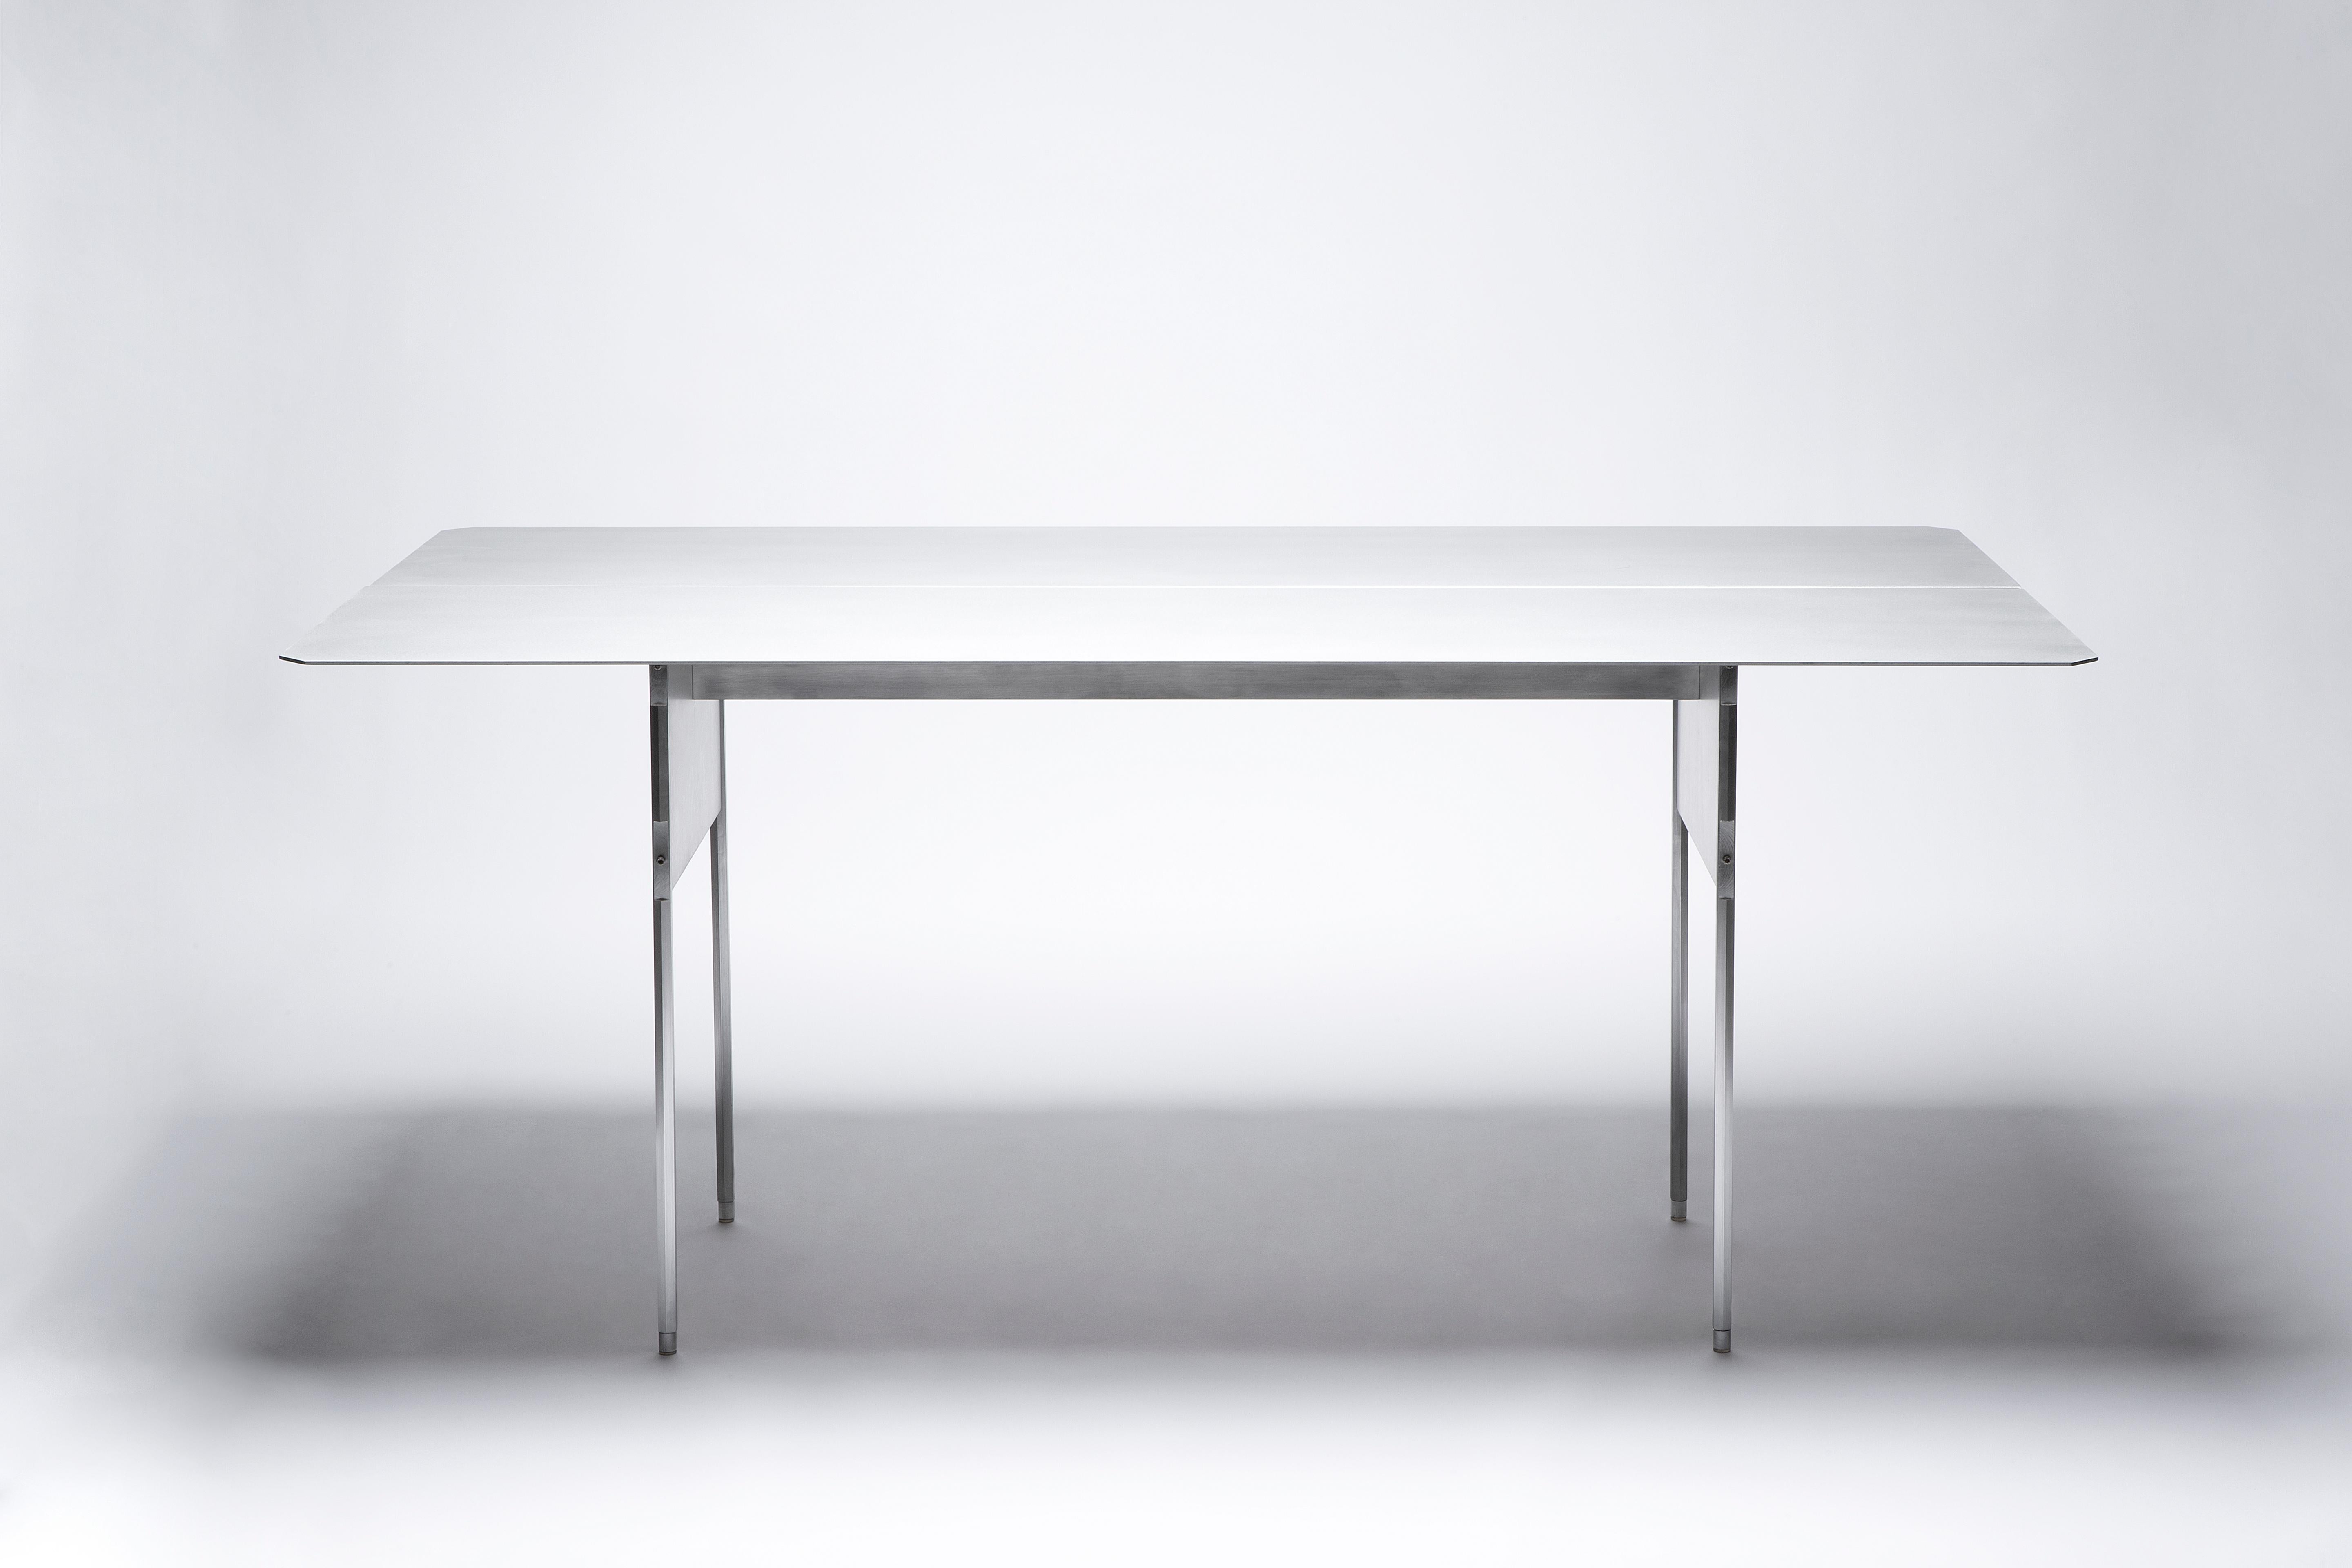 Carbonari table by Scattered Disc Objects + Stefano Marongiu
Materials: With a natural aluminium finish: it is made of anticorodal aluminium alloy, while legs only are in ergal aluminium. Surfaces are hand-brushed and finished with